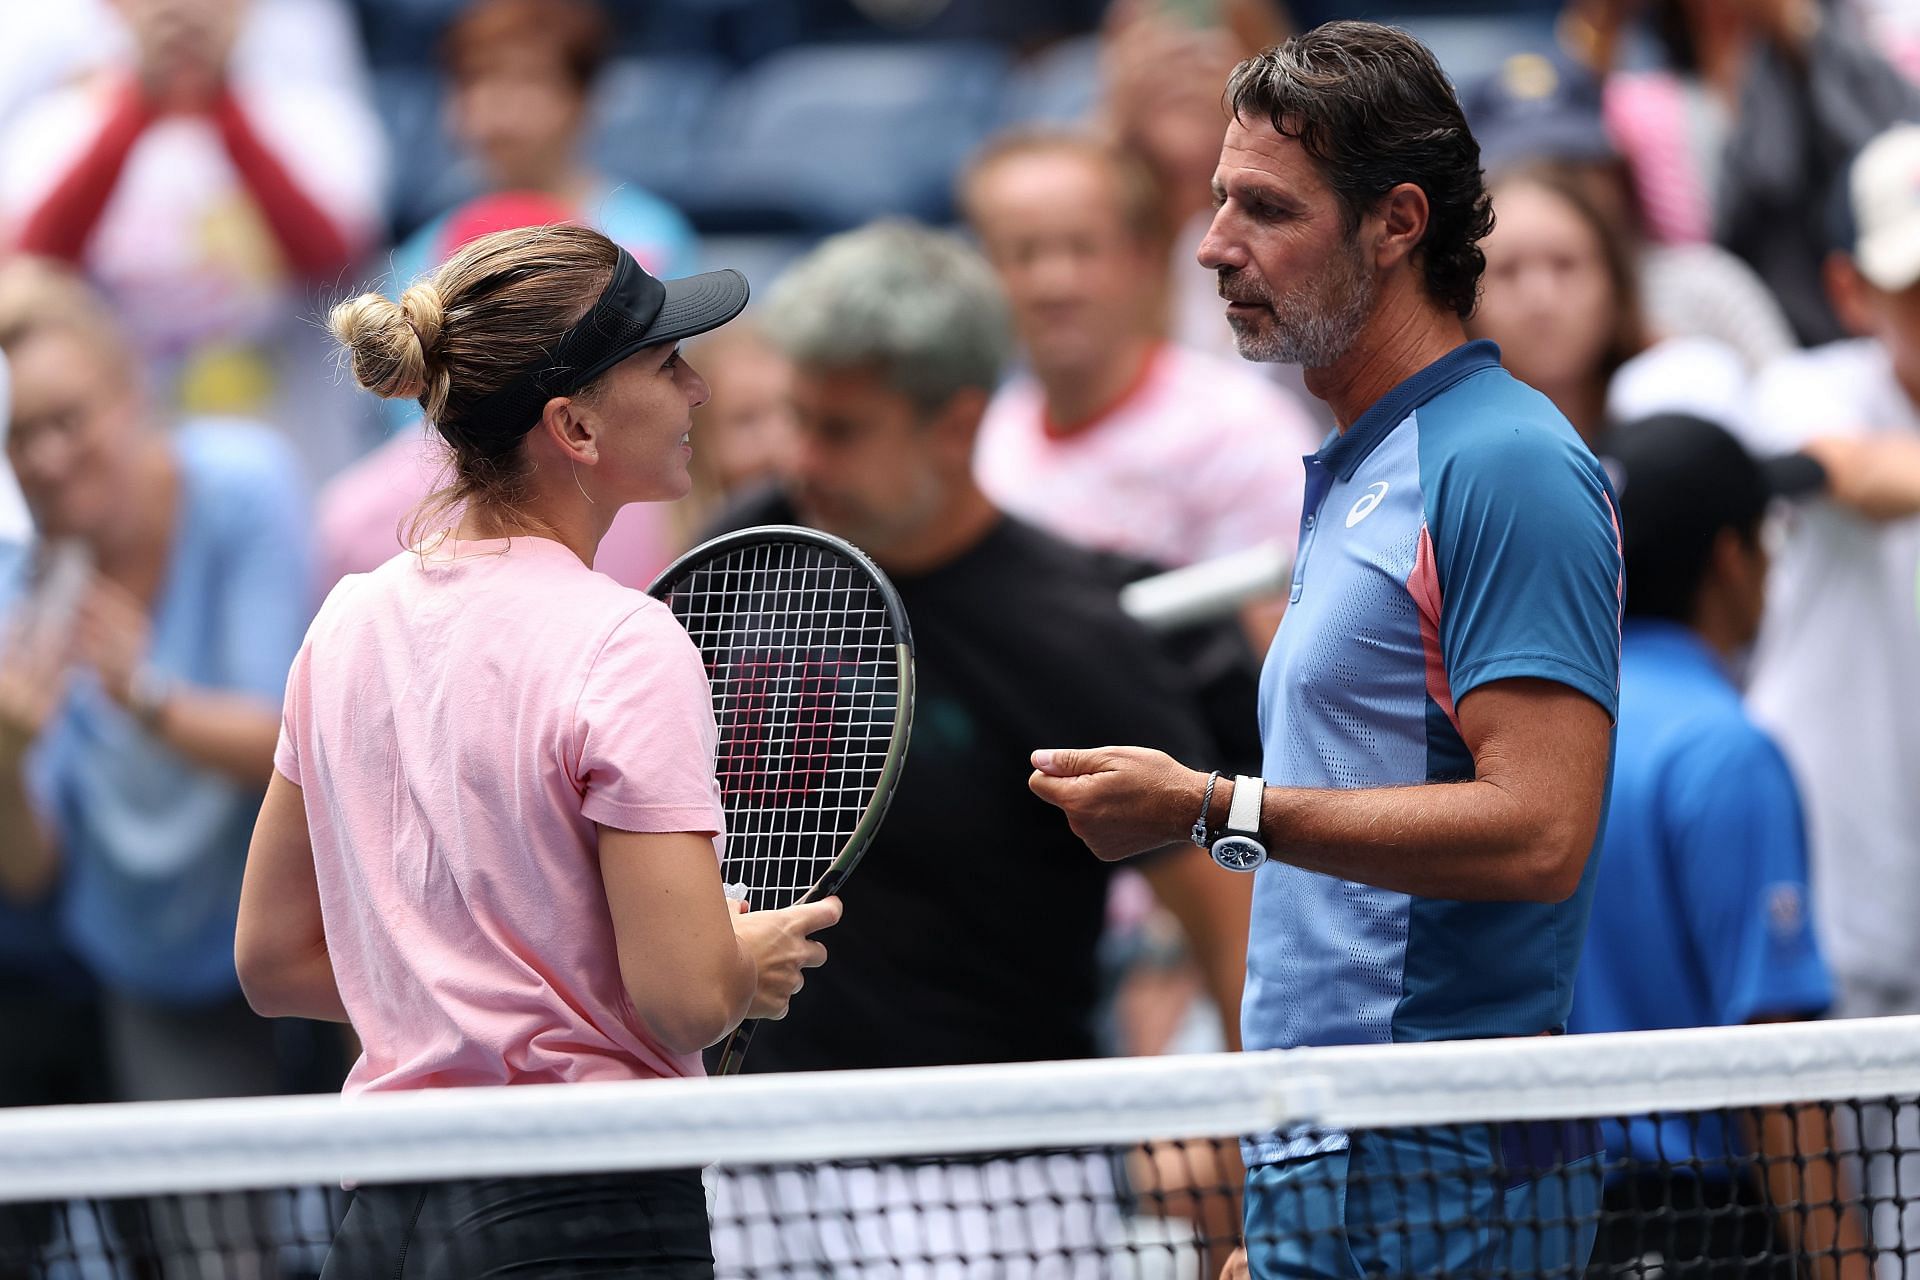 The former World No. 1 now has Patrick Mouratoglou in her team